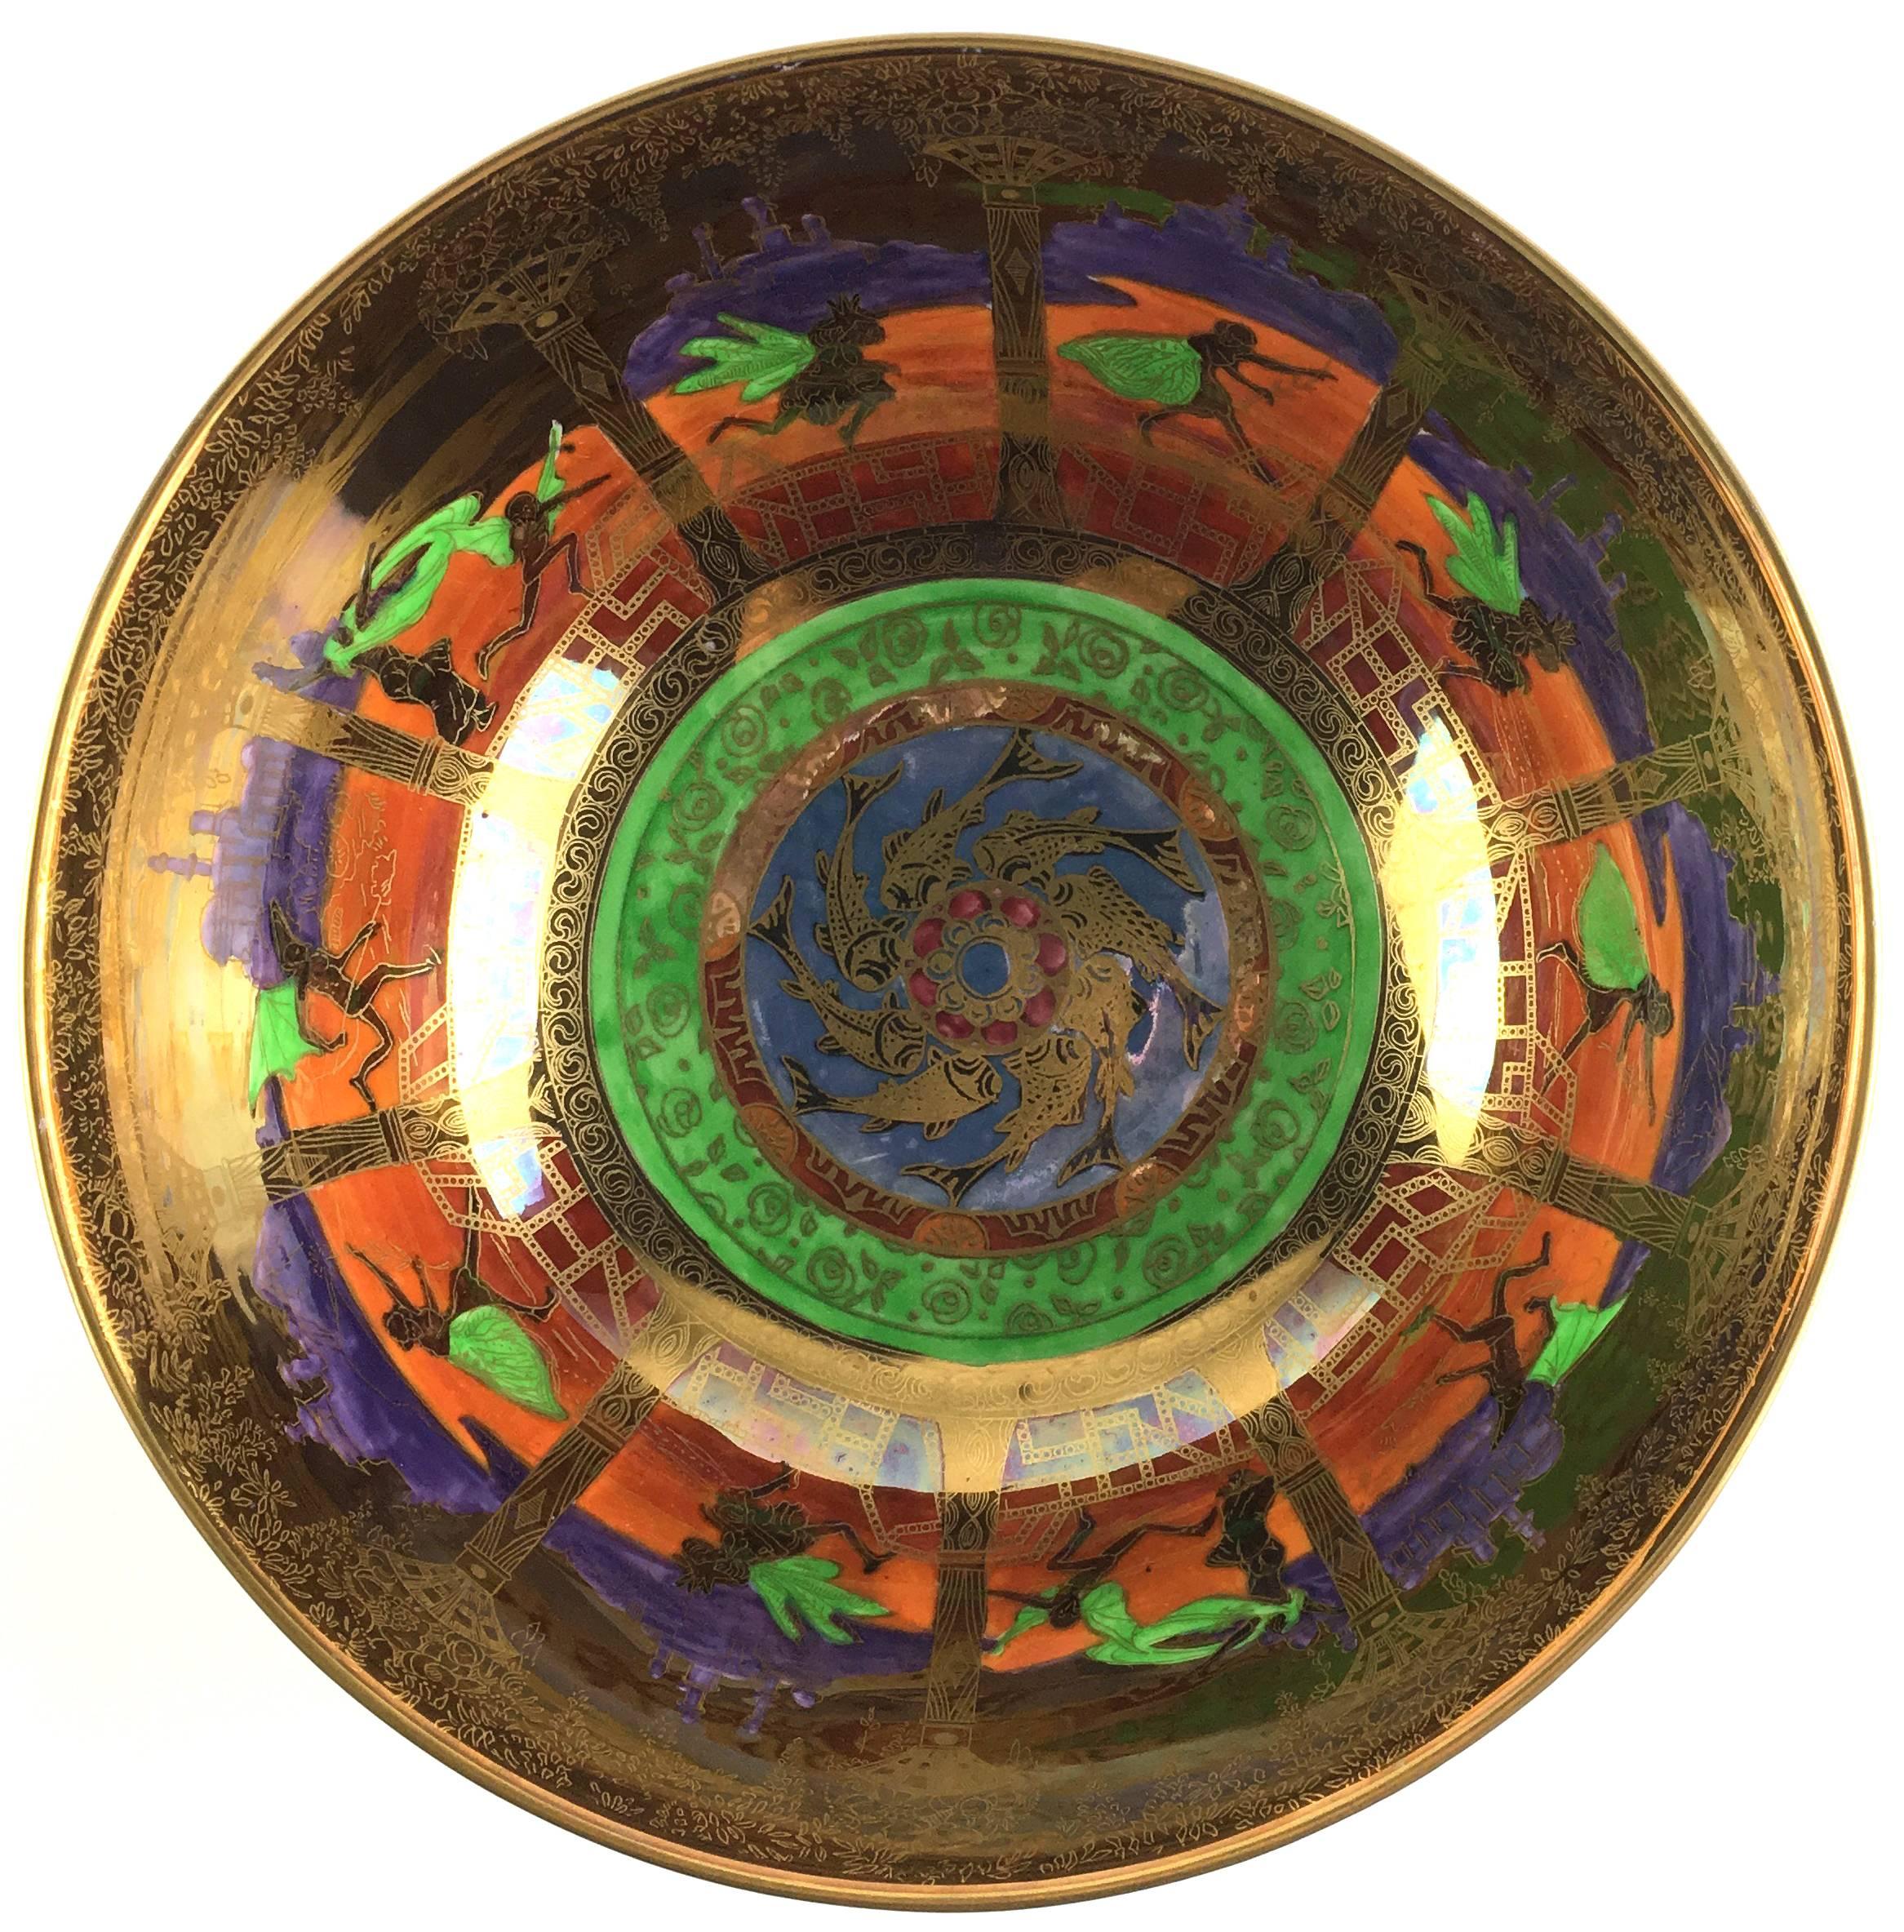 Early 20th Century Wedgwood Fairyland Flame Lustre Porcelain Art Deco Serving Bowl For Sale